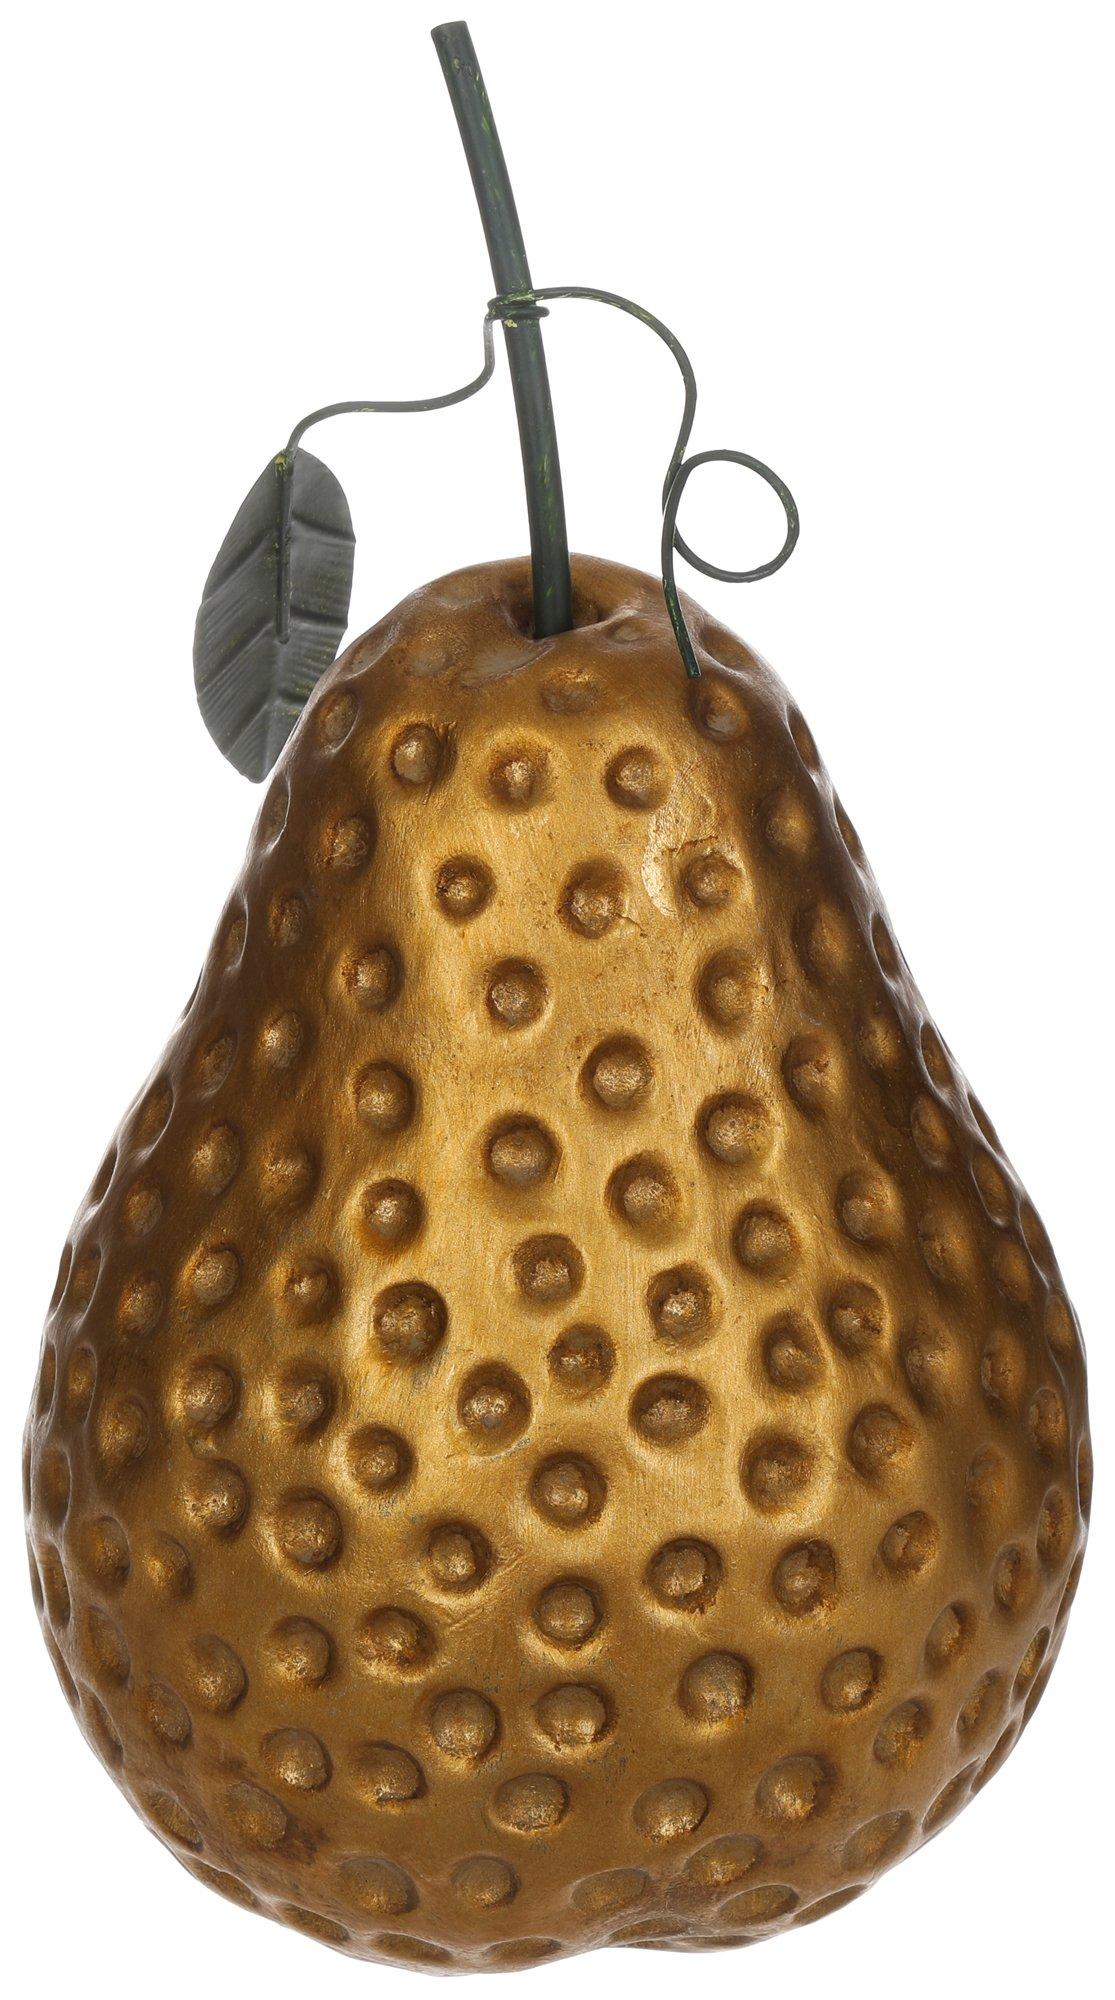 13 in. Golden Pear Home Accent